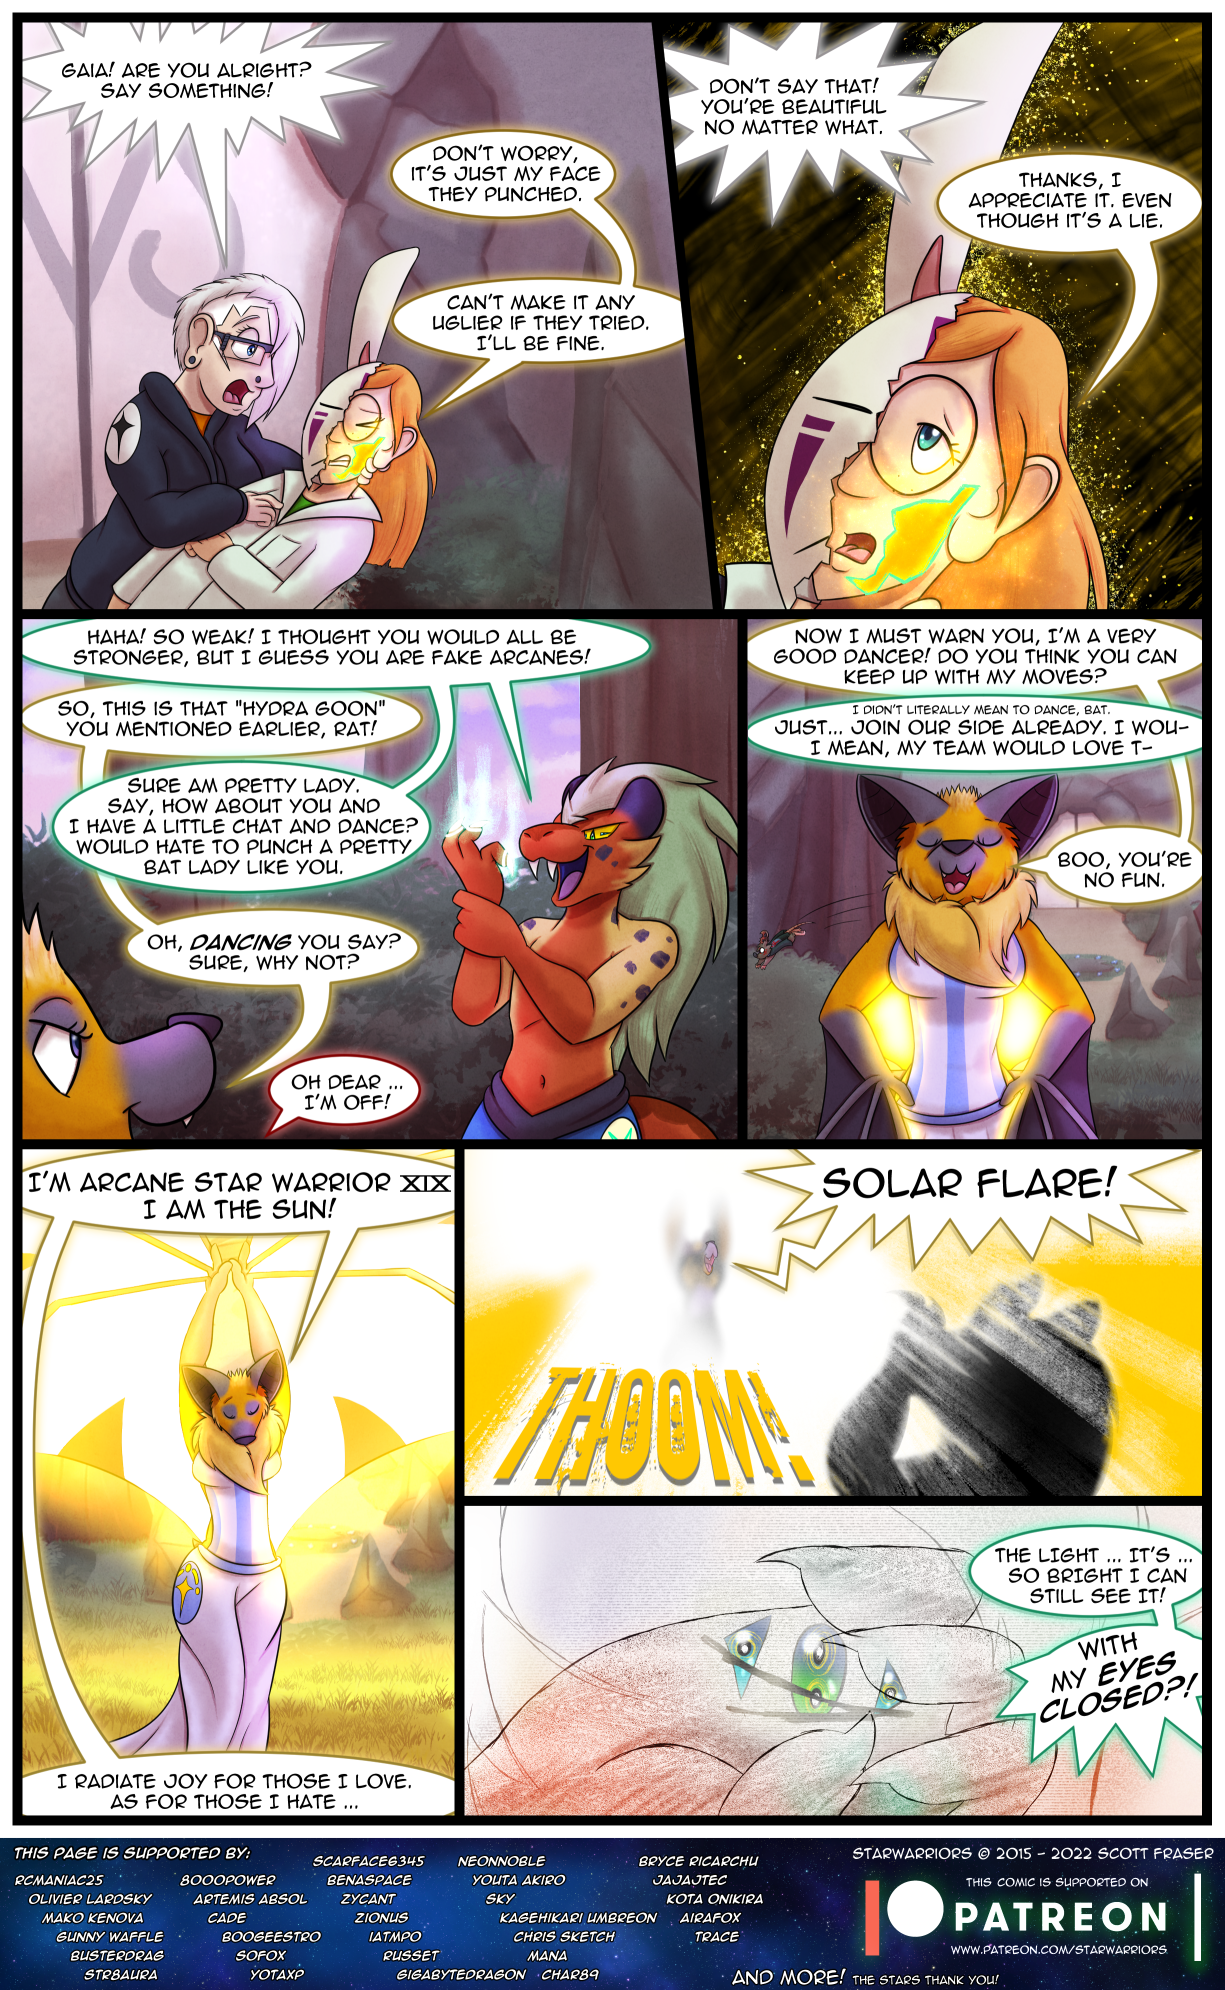 Ch6 Page 3 – The Sun